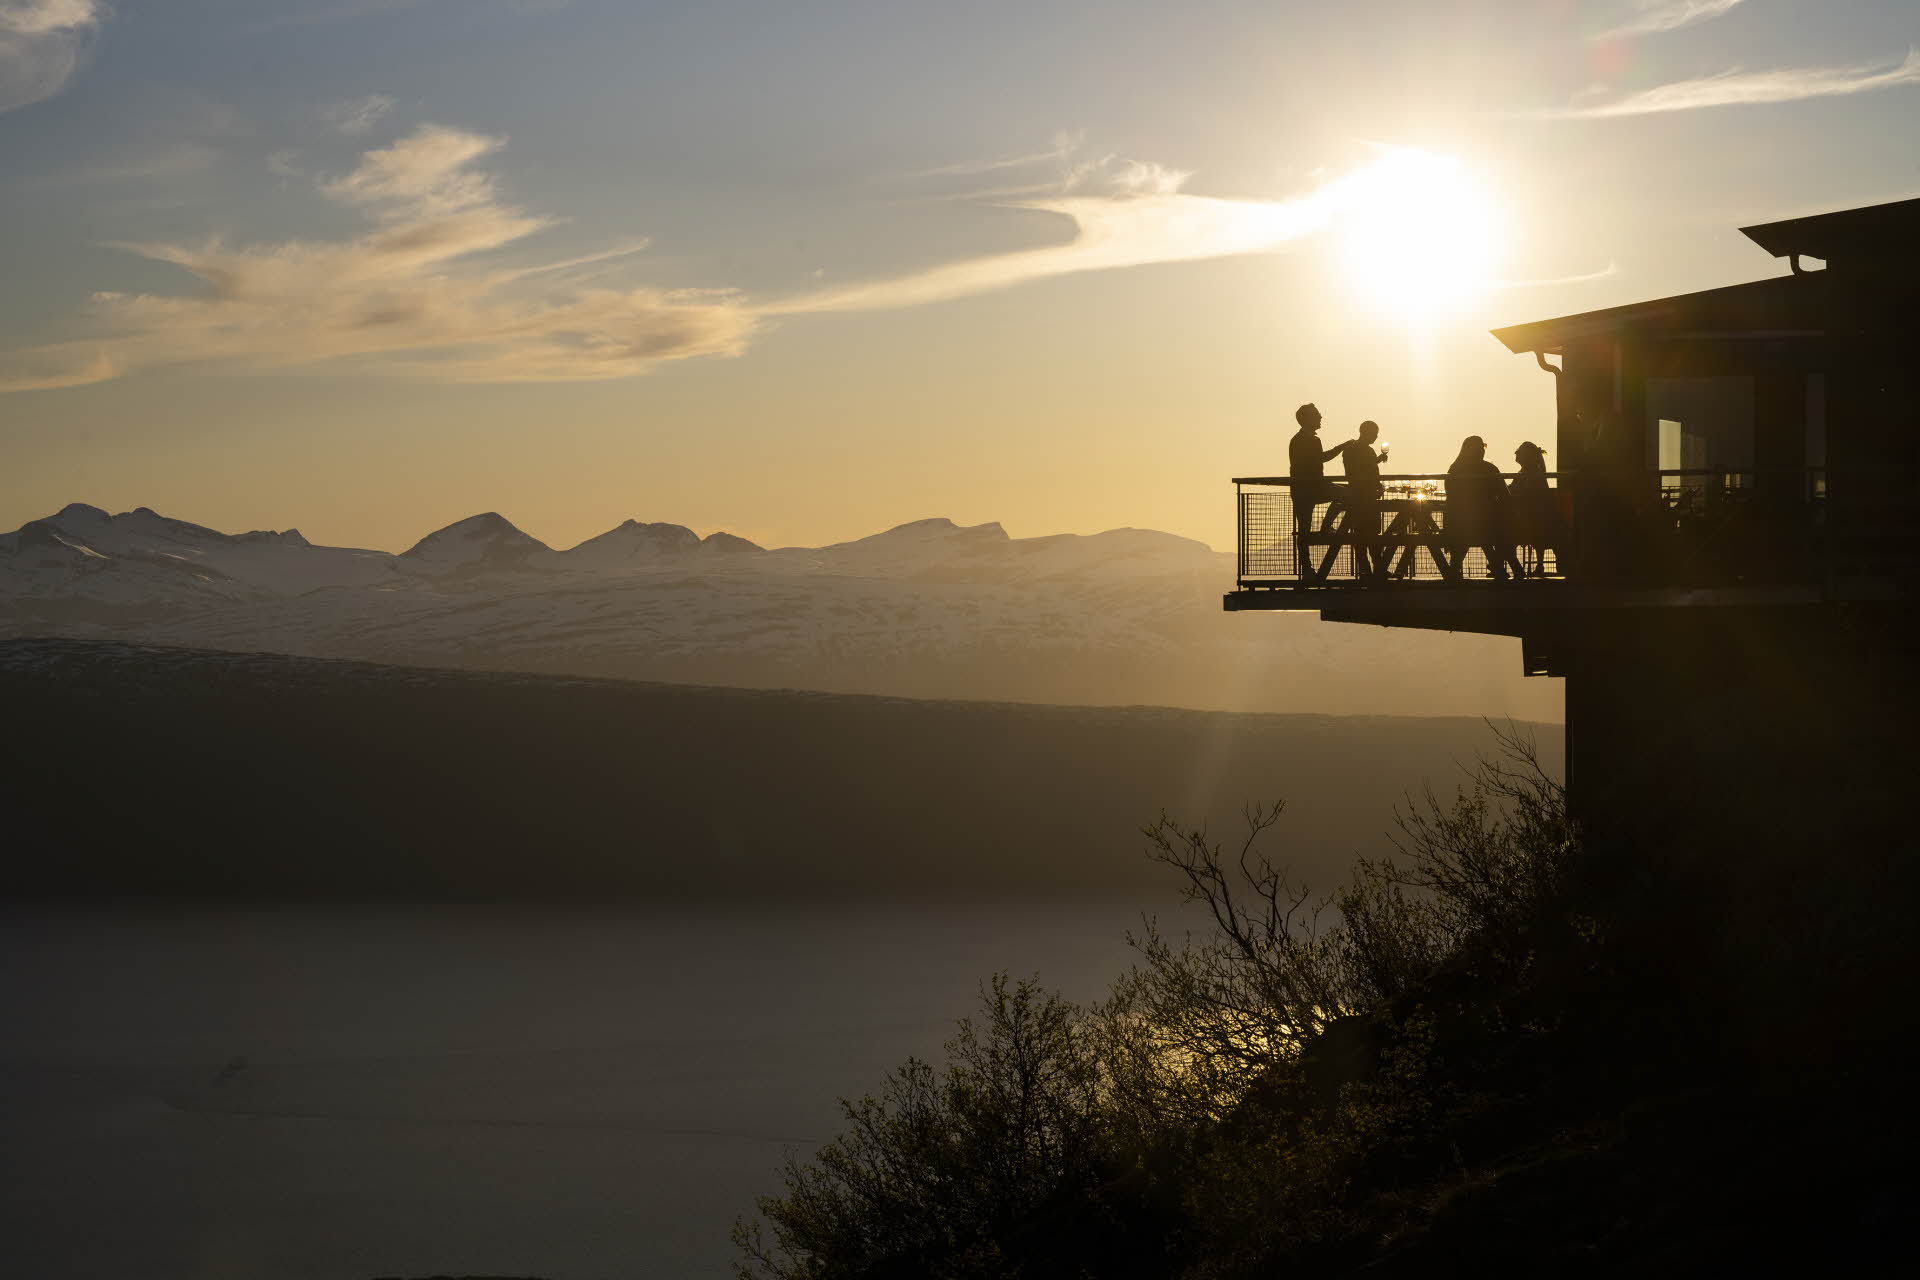 People standing on the balcony of the Narvikfjellet Restaurant in the Midnight Sun. Fjord and mountains in the background.